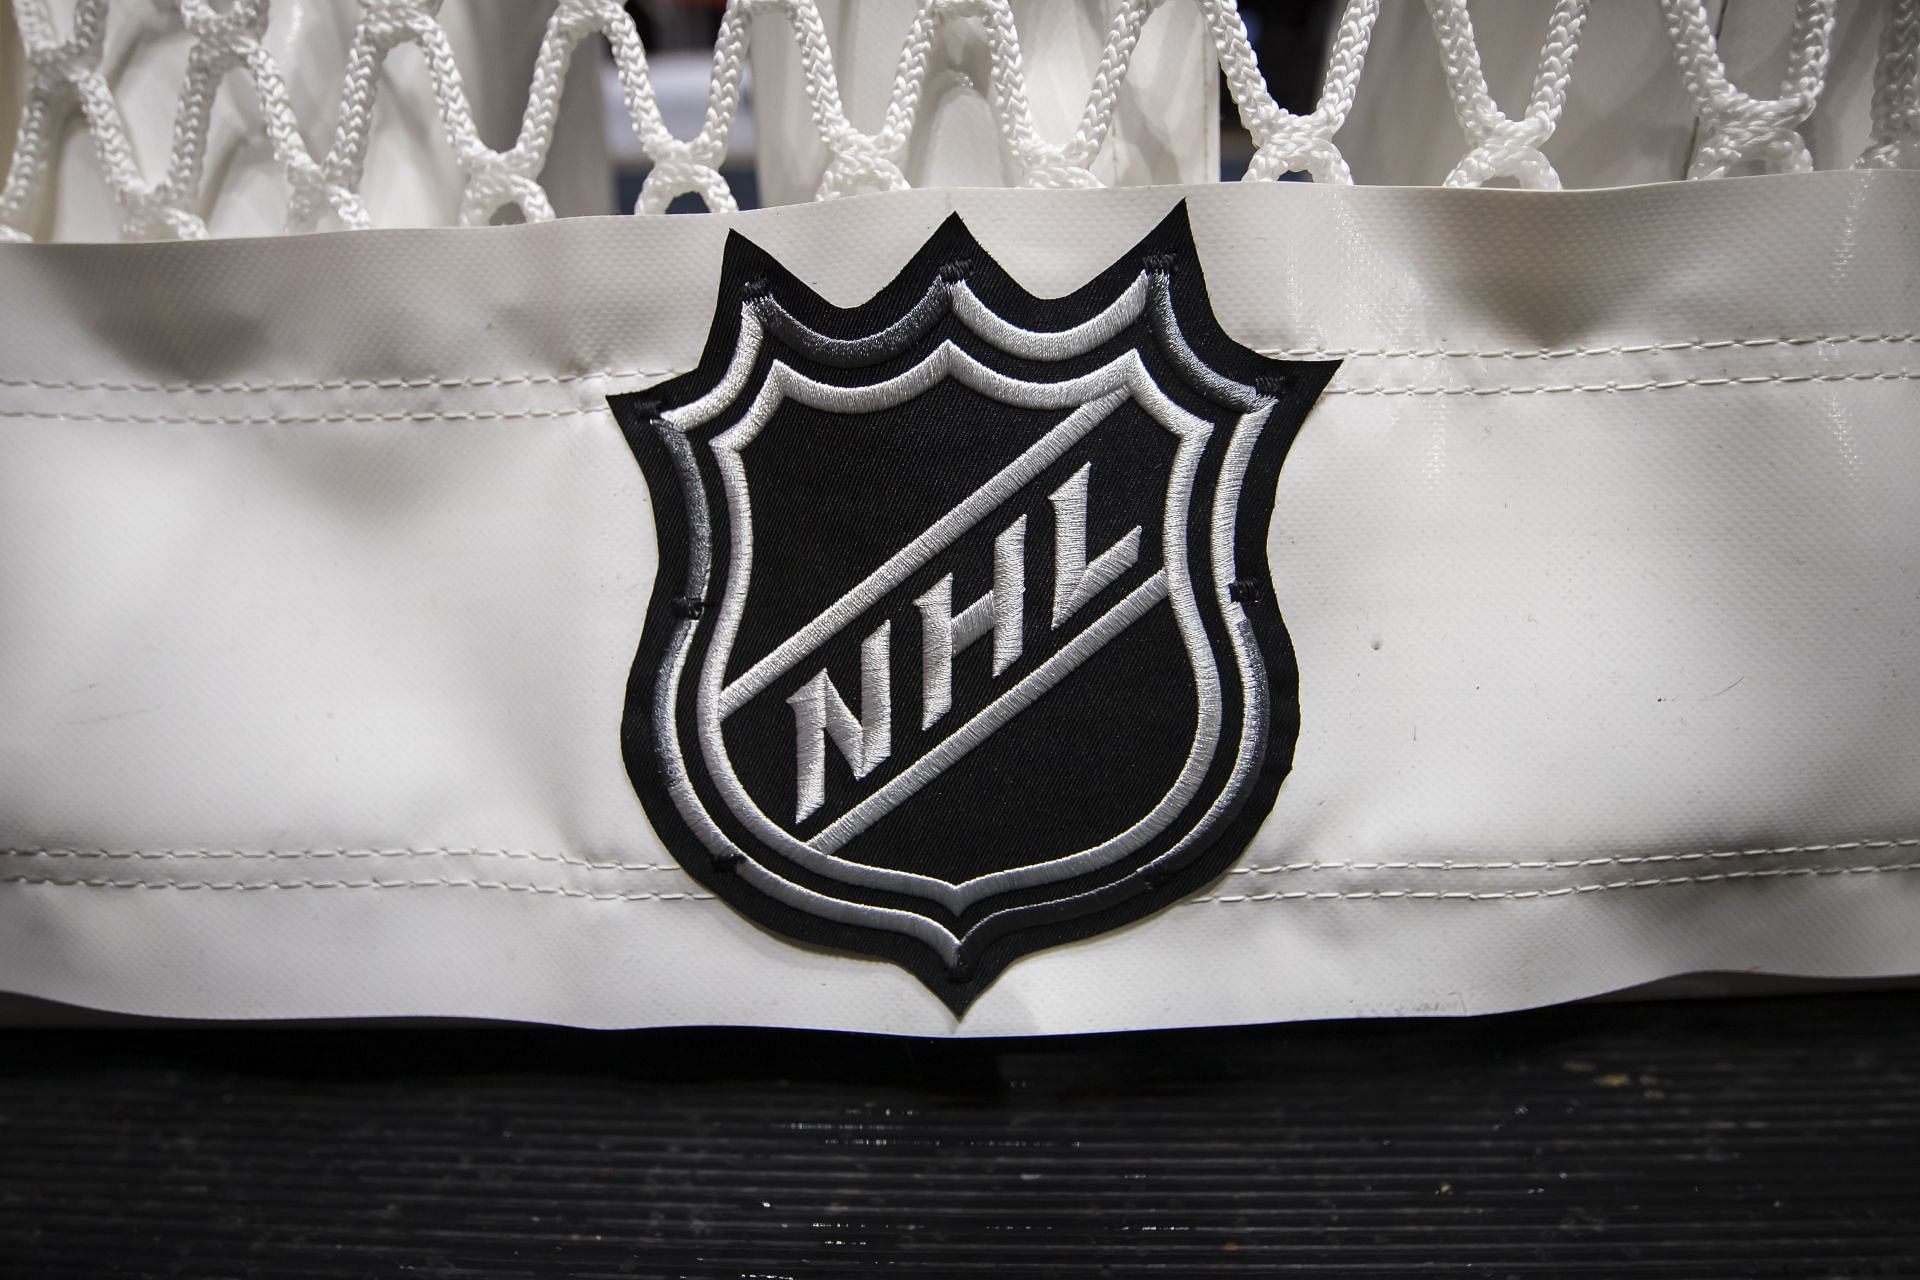 Fanatics replacing Adidas as NHL's official jersey supplier